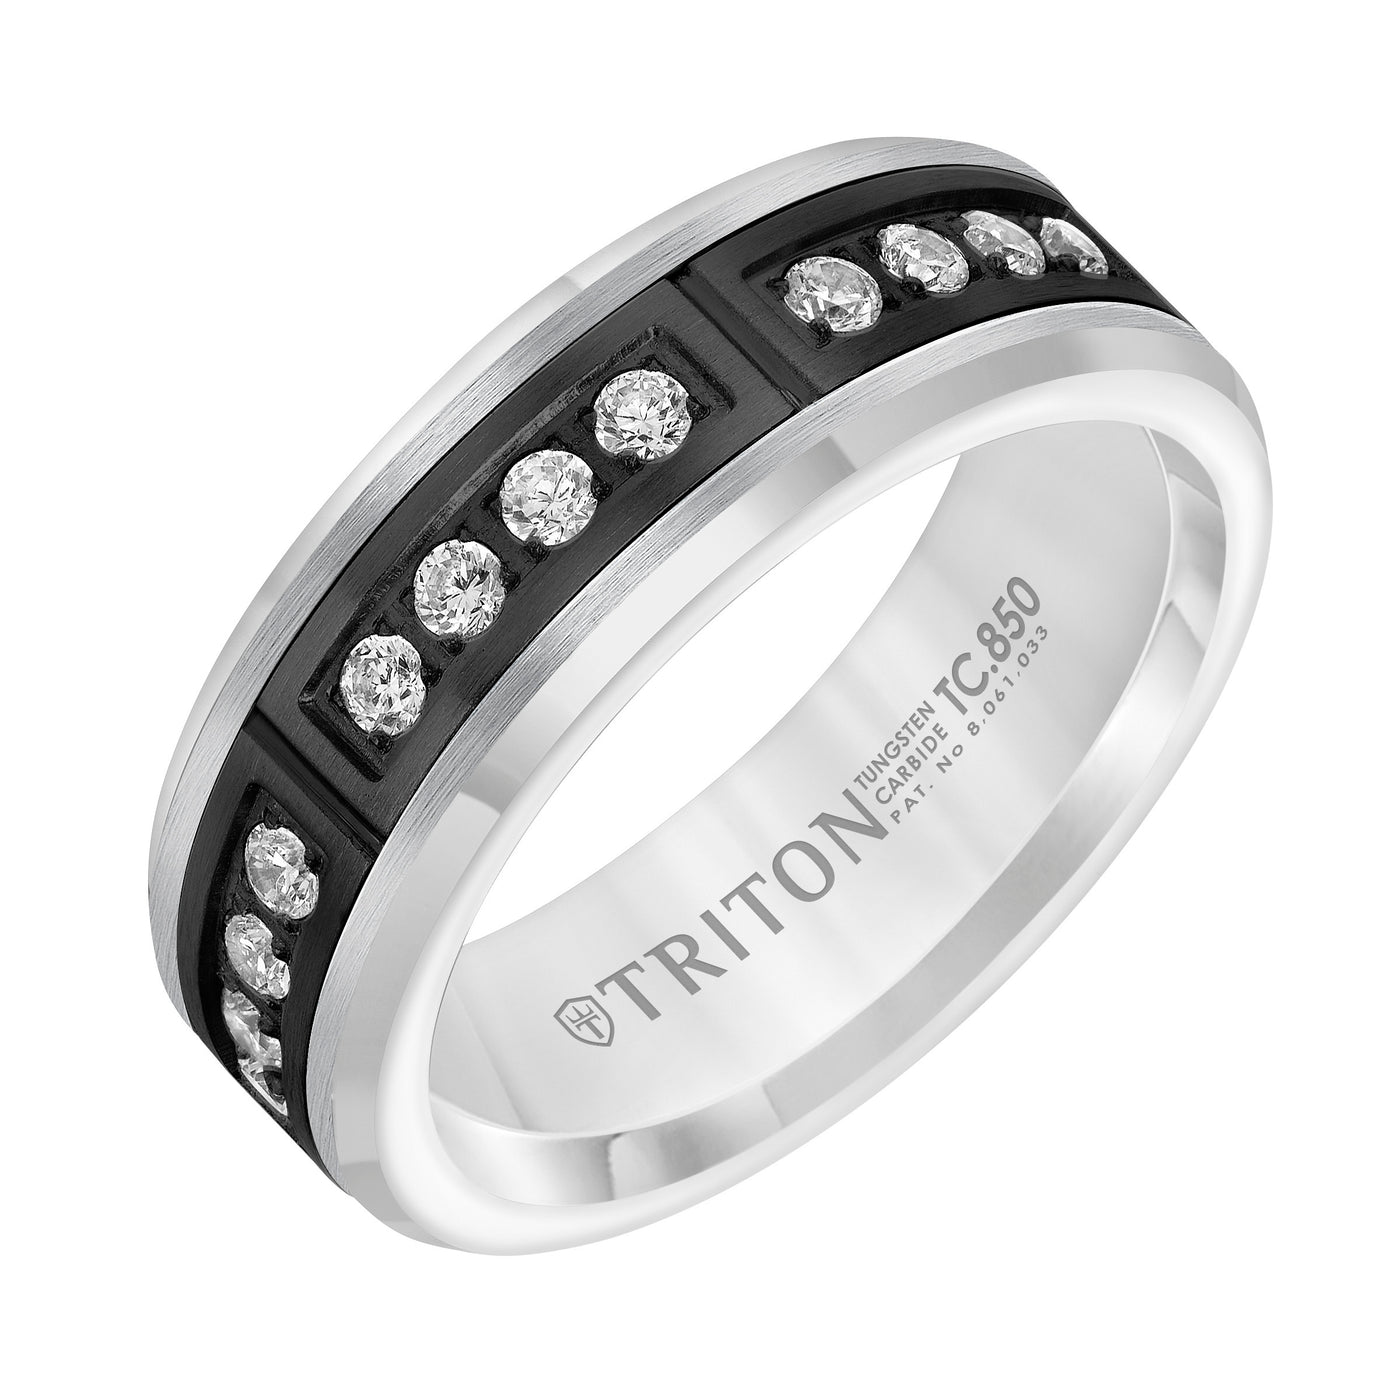 7mm Comfort Fit White Tungsten Band with Channel Set Diamonds in Black PVD Coated Steel